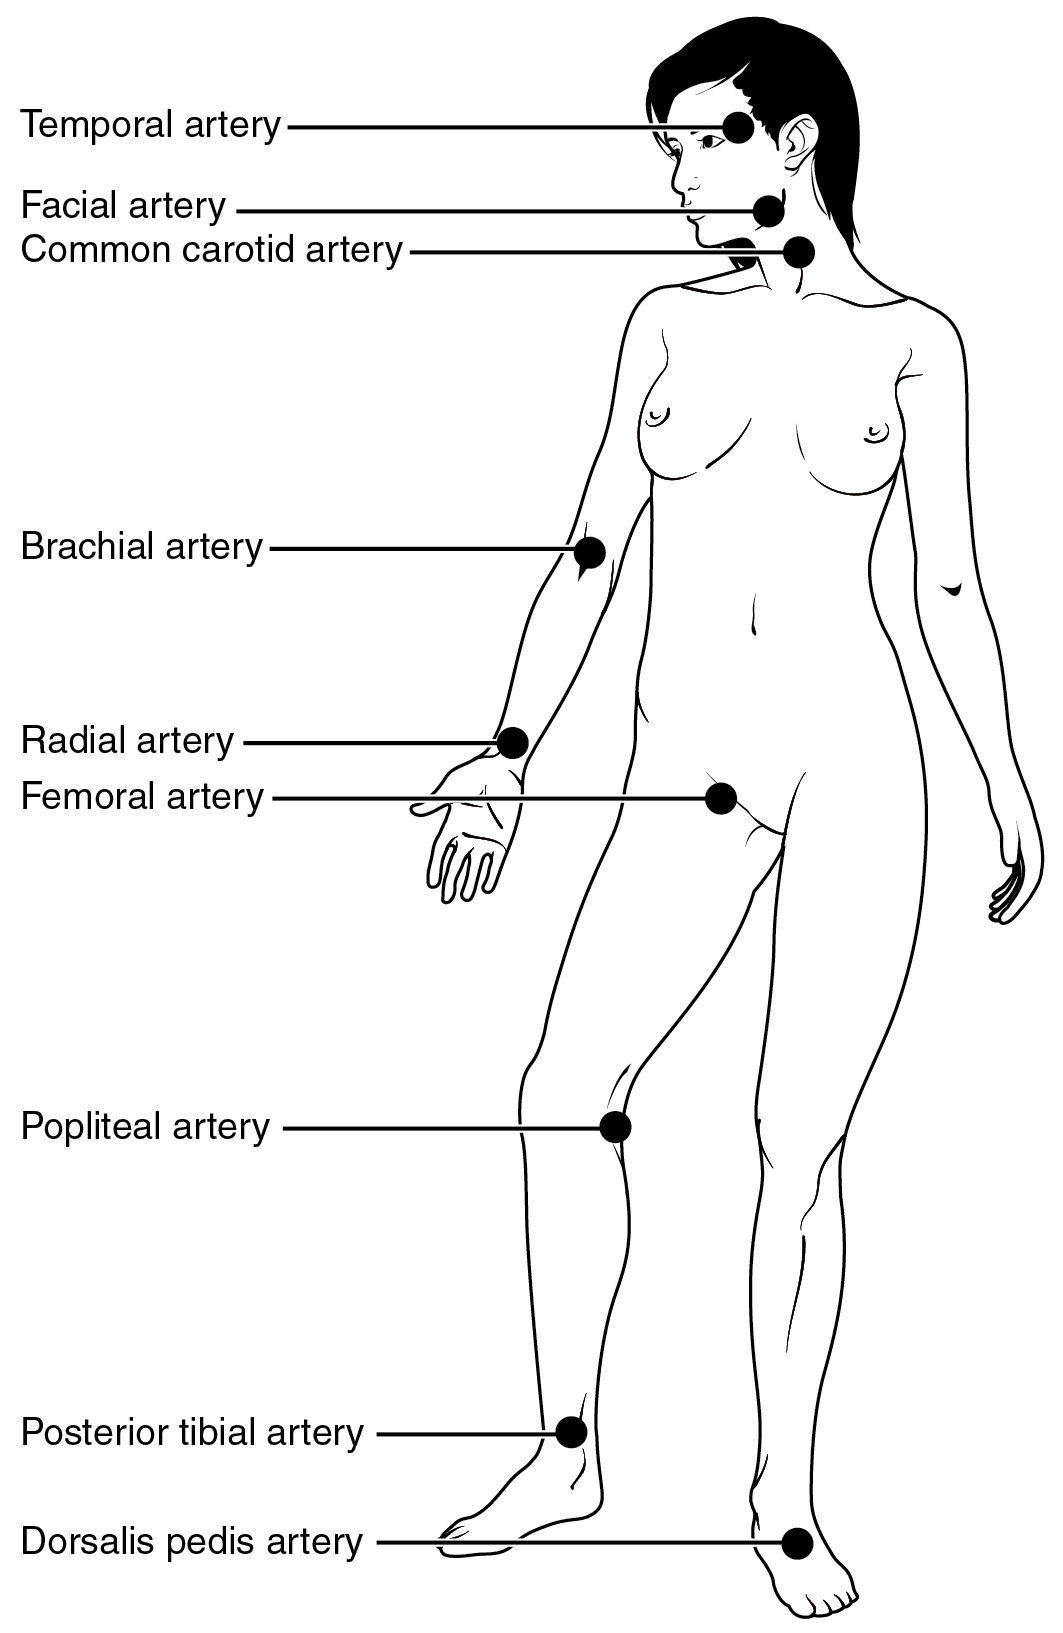 Pulse points in a woman’s body. Image description available.